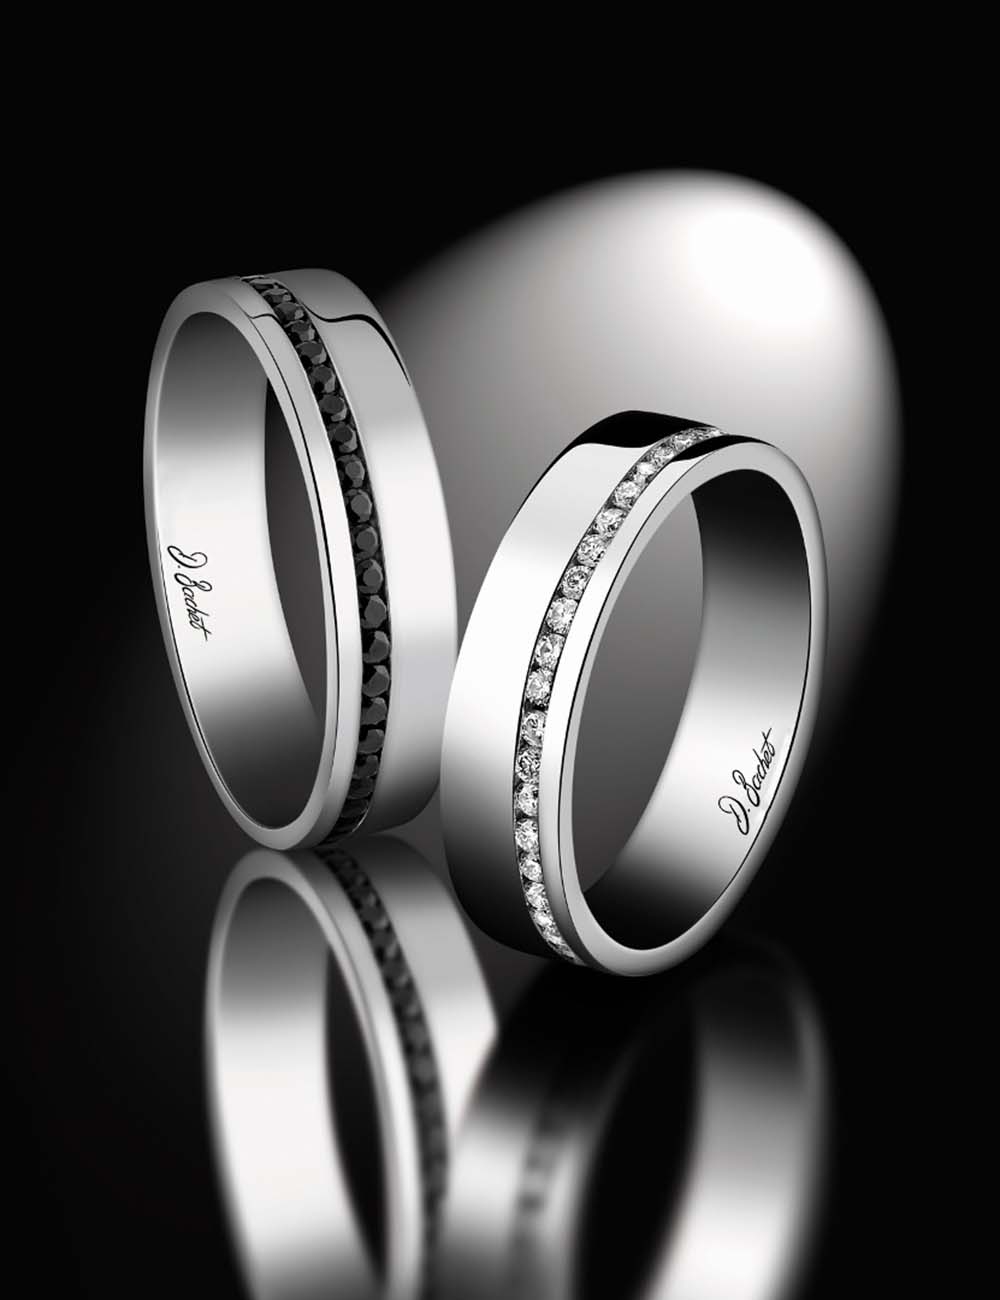 Modern diamond wedding band, sleek design, handcrafted in French workshops with shining metal and white diamonds.